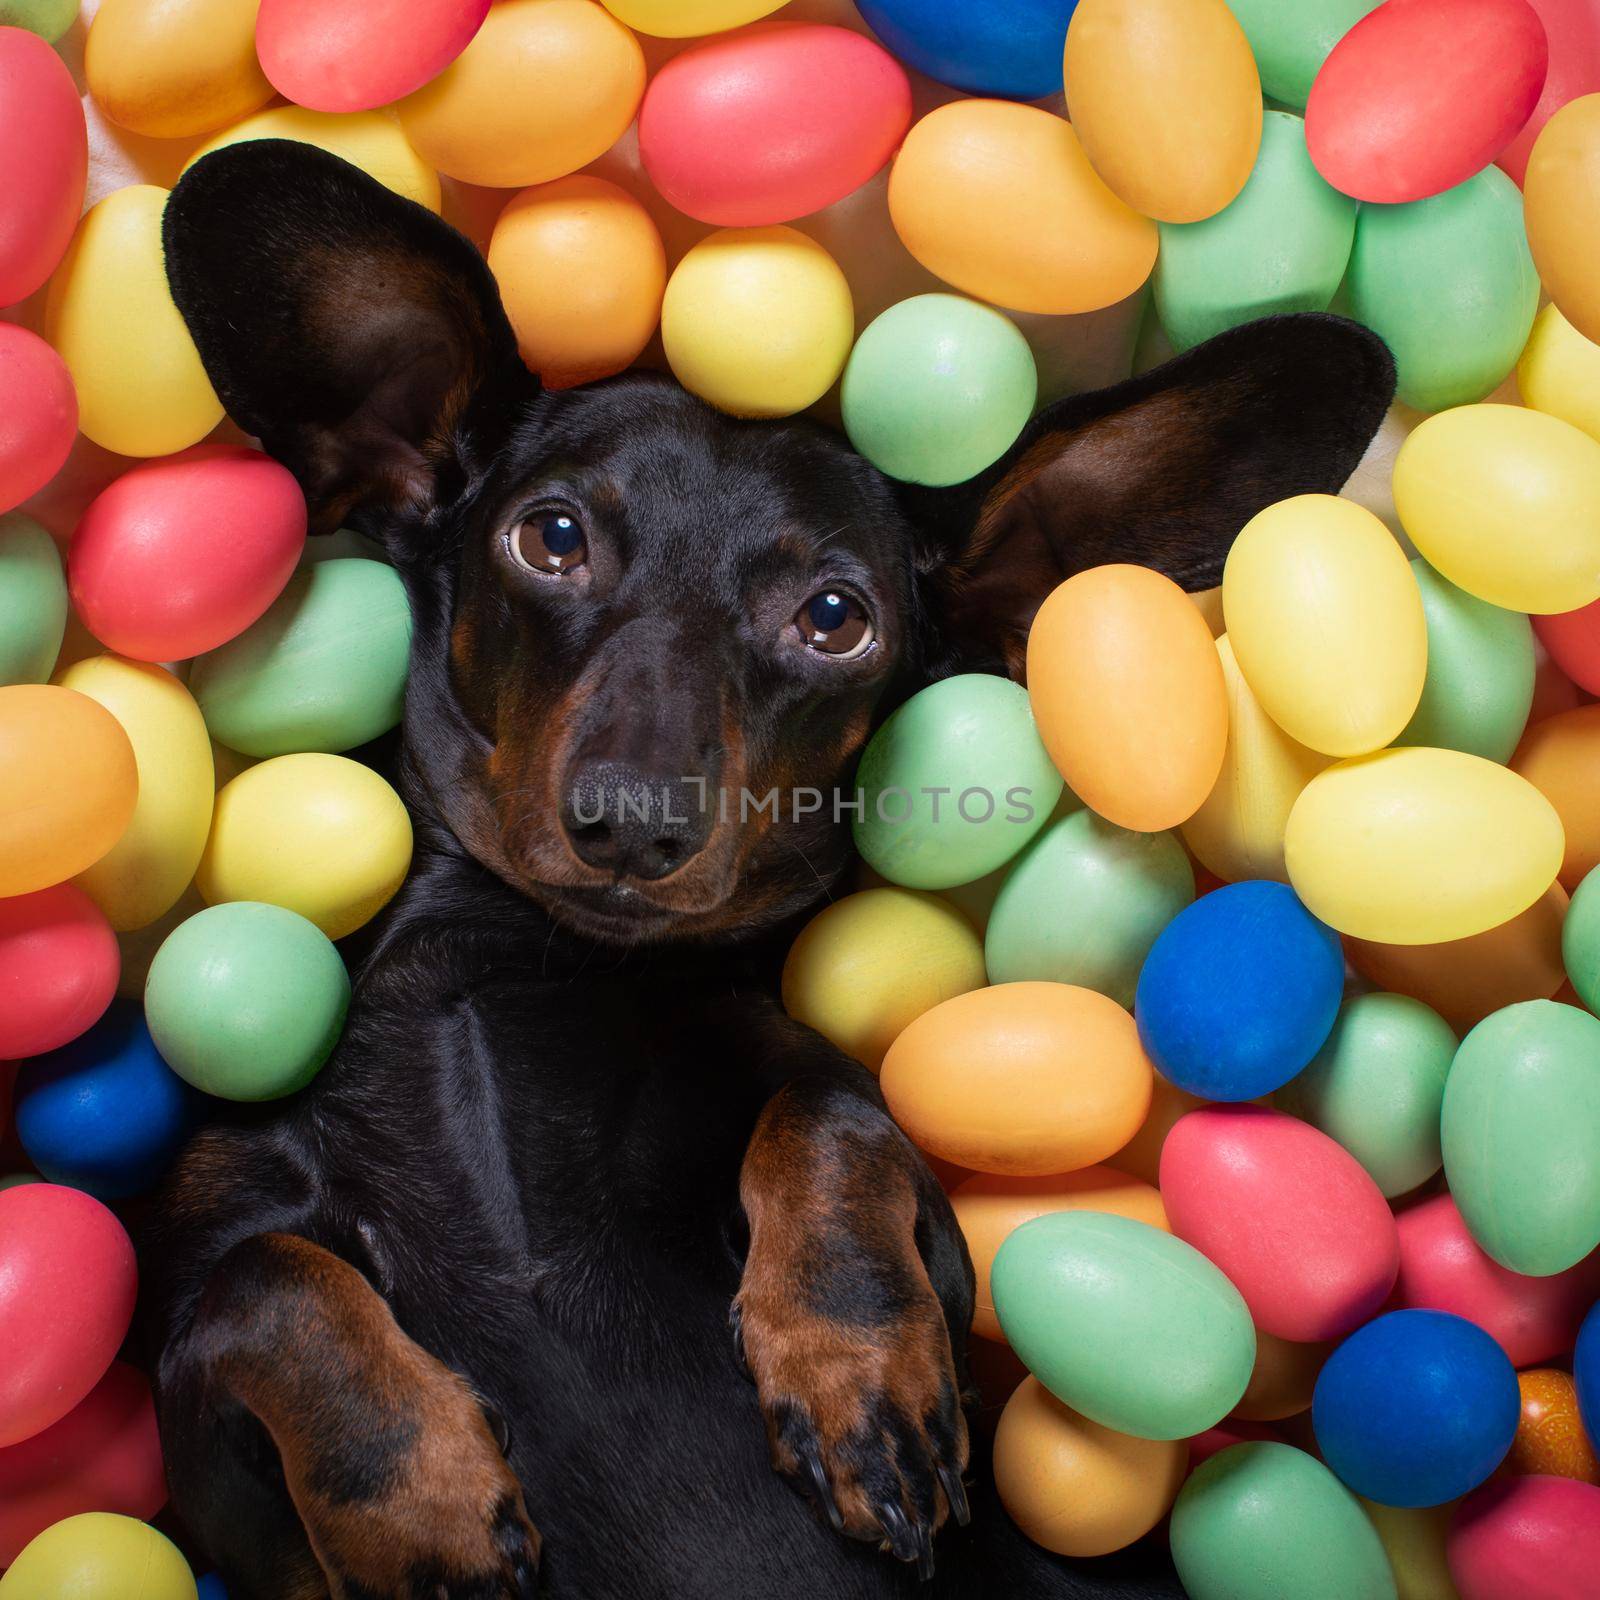 happy easter  dachshund sausage  dog lying in bed full of funny colourful eggs ,  for the holiday season